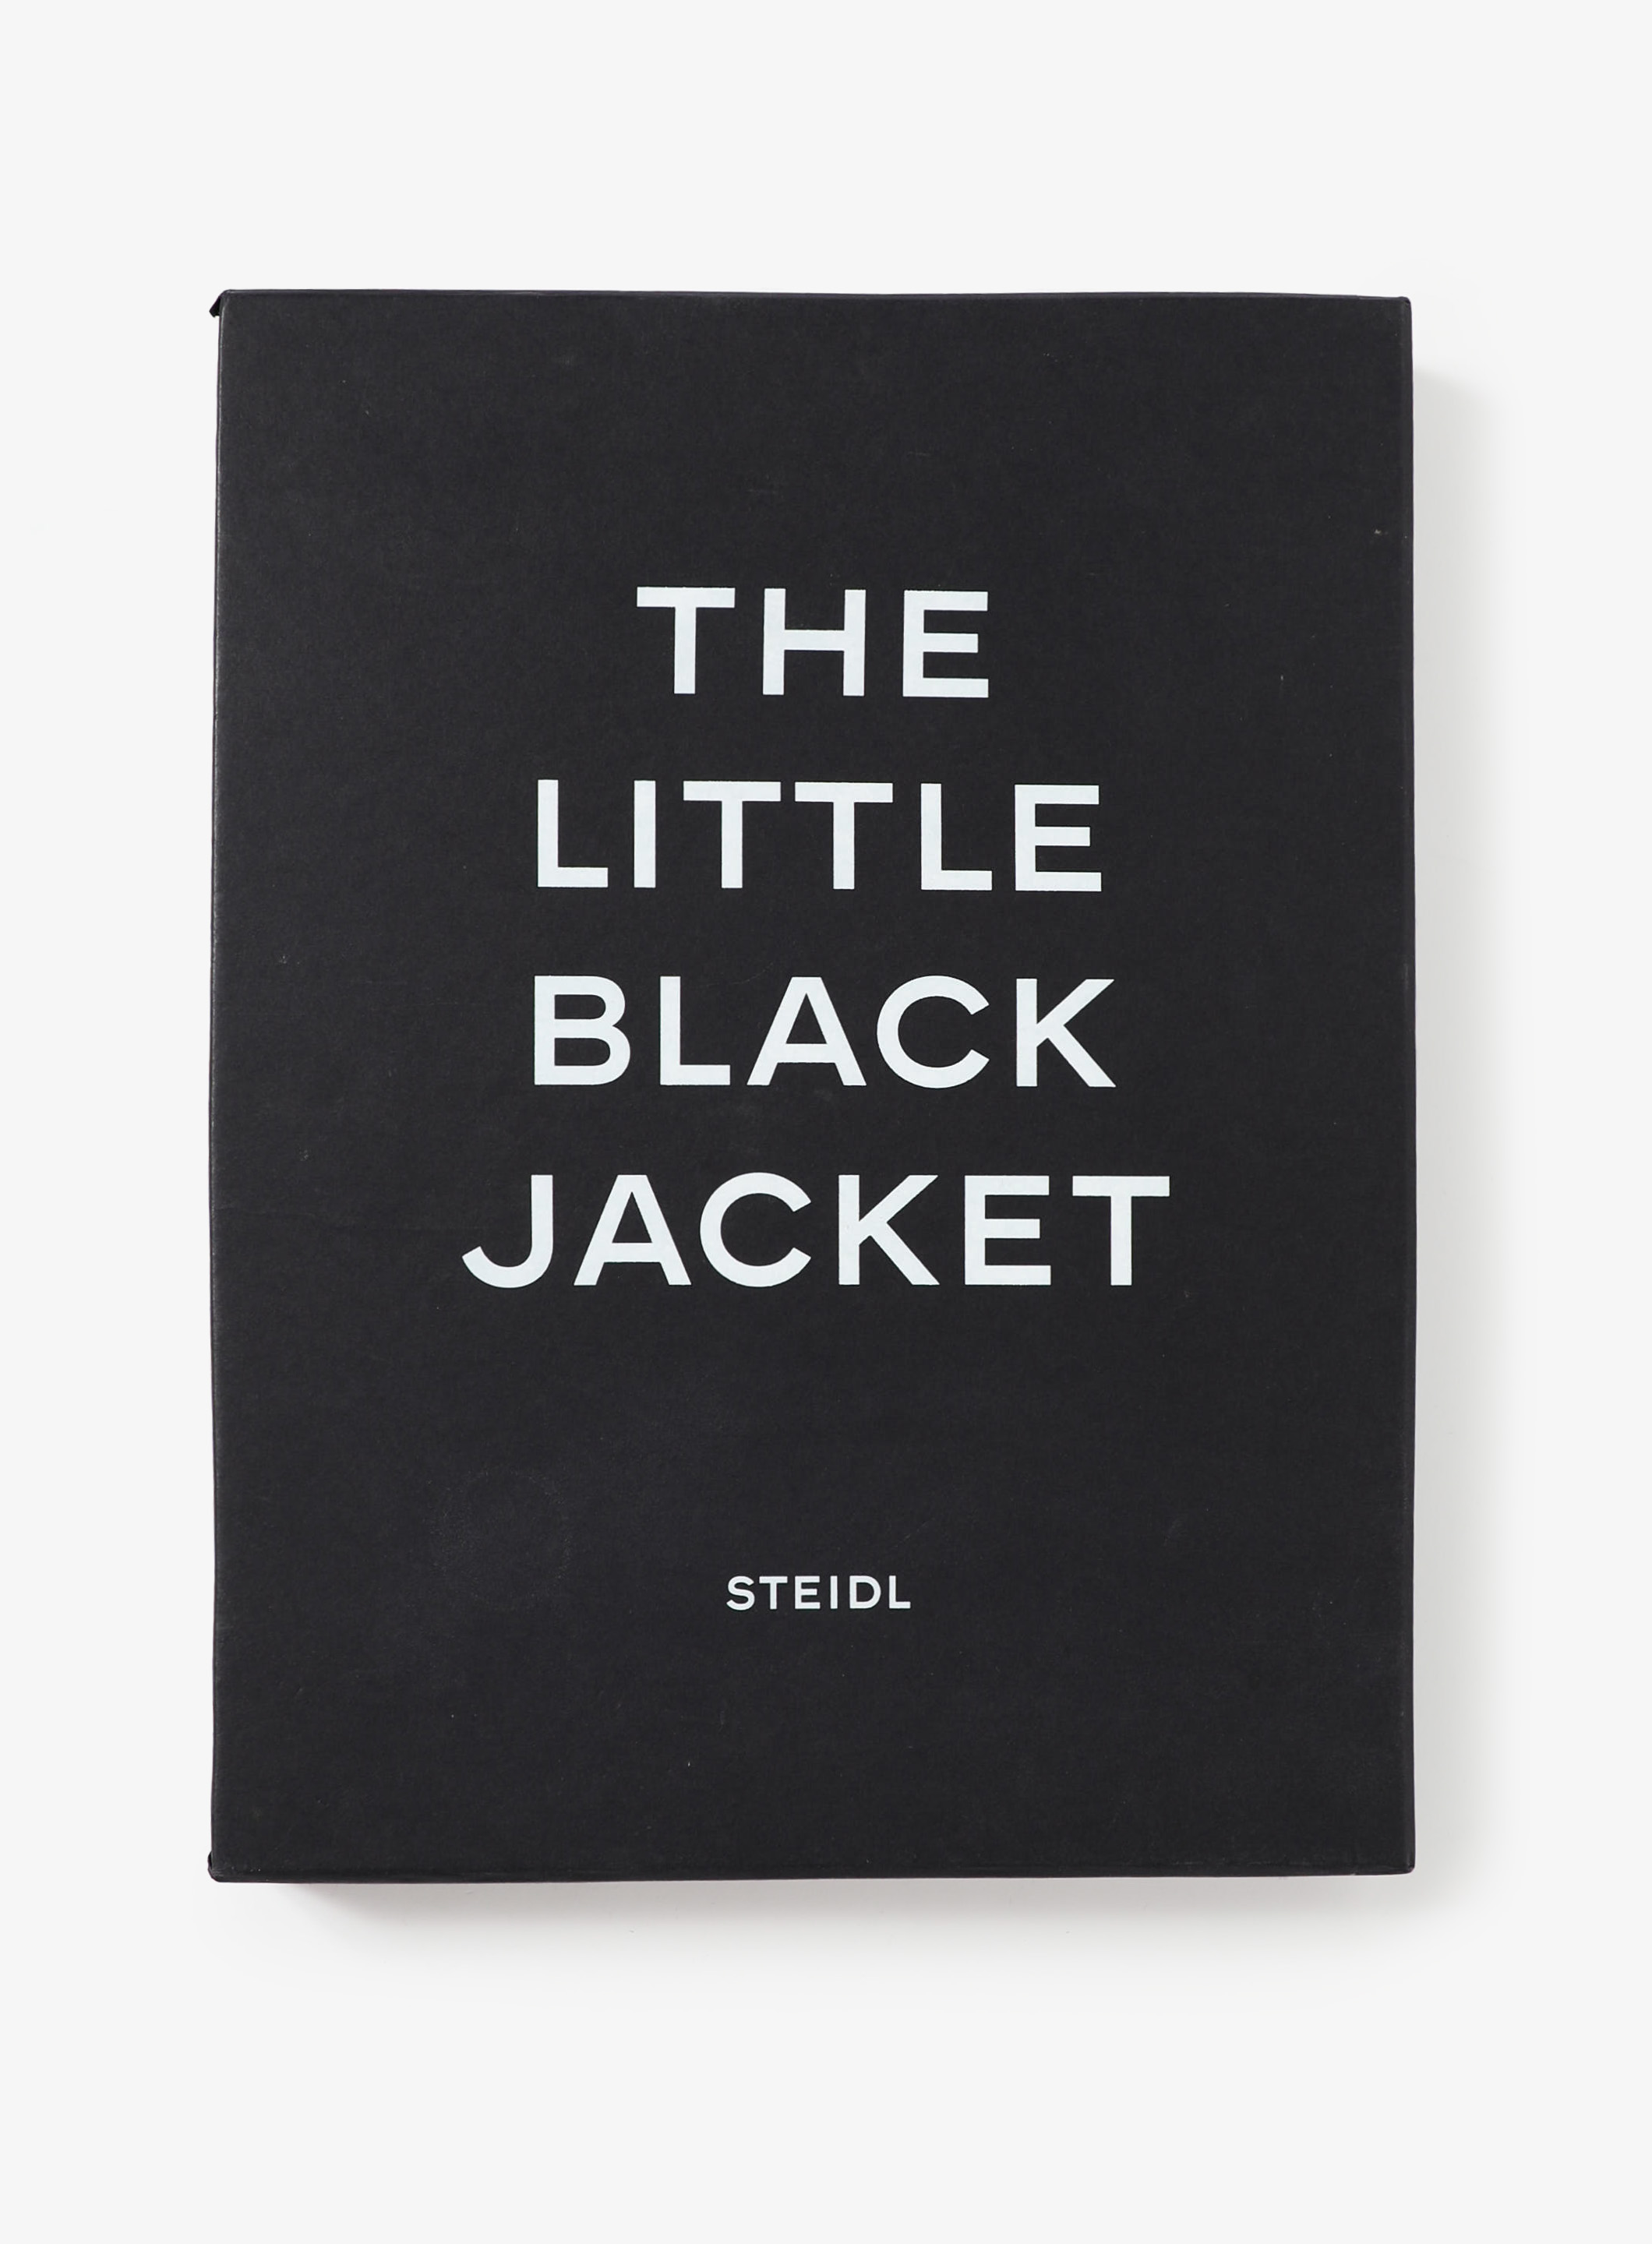 The Little Black Jacket: Chanel's Classic Revisited